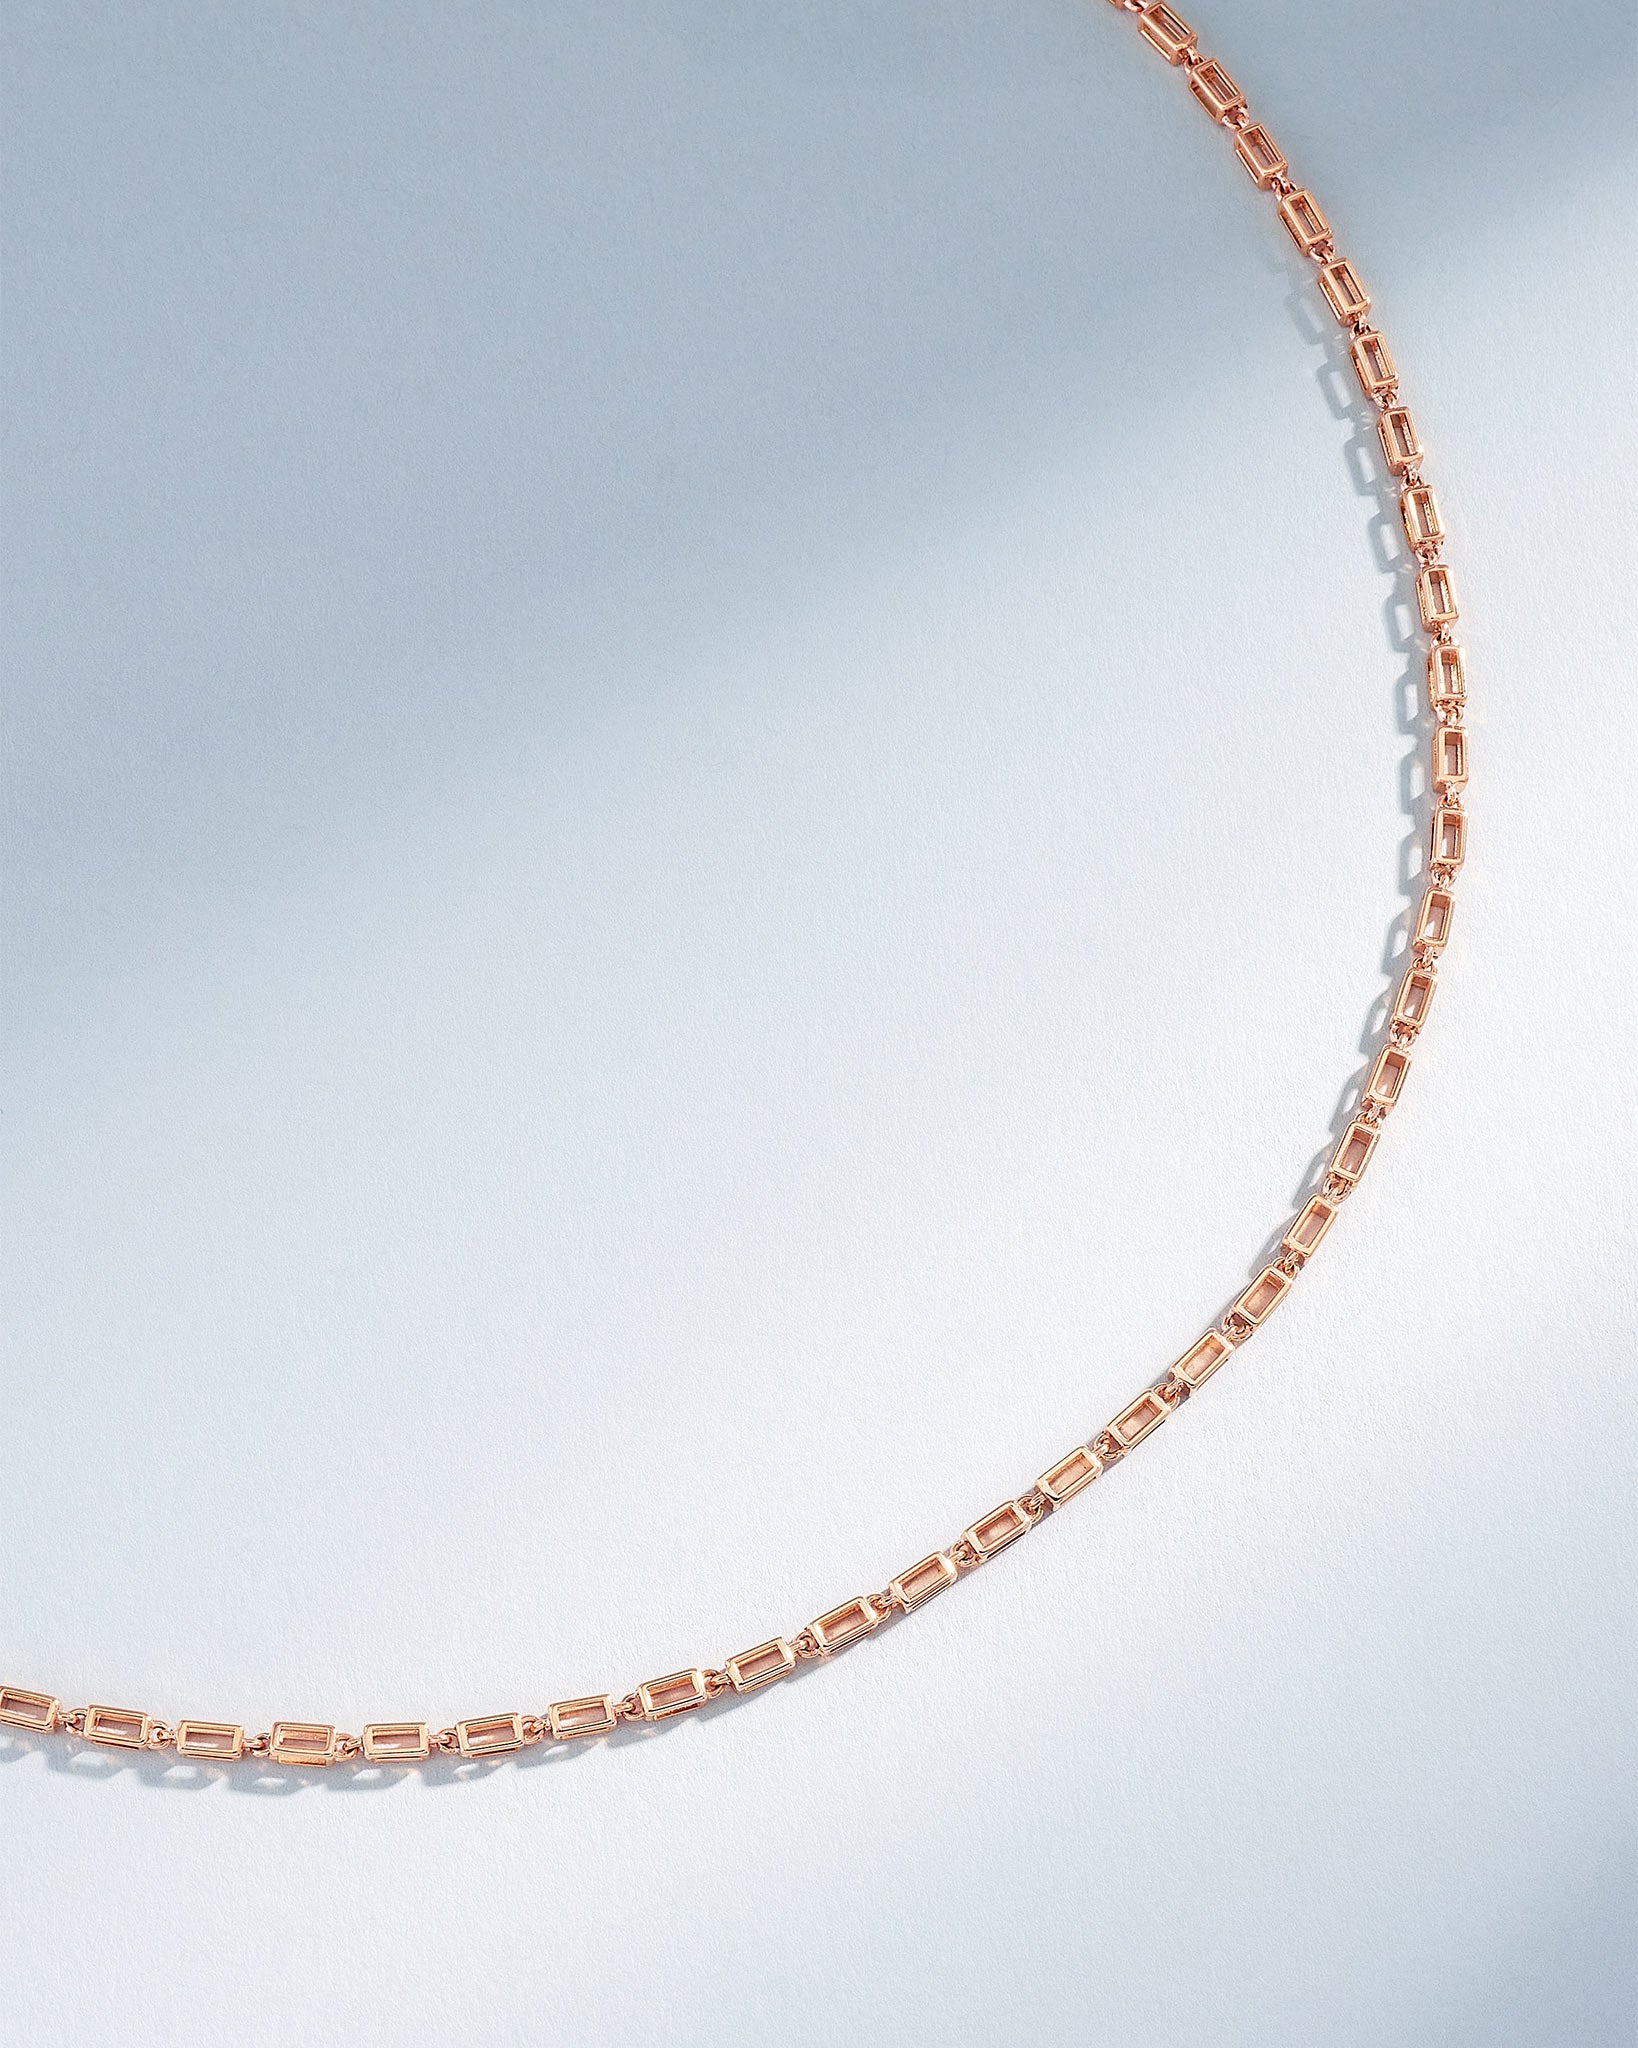 Suzanne Kalan Block-Chain Hollow Medium Necklace in 18k rose gold